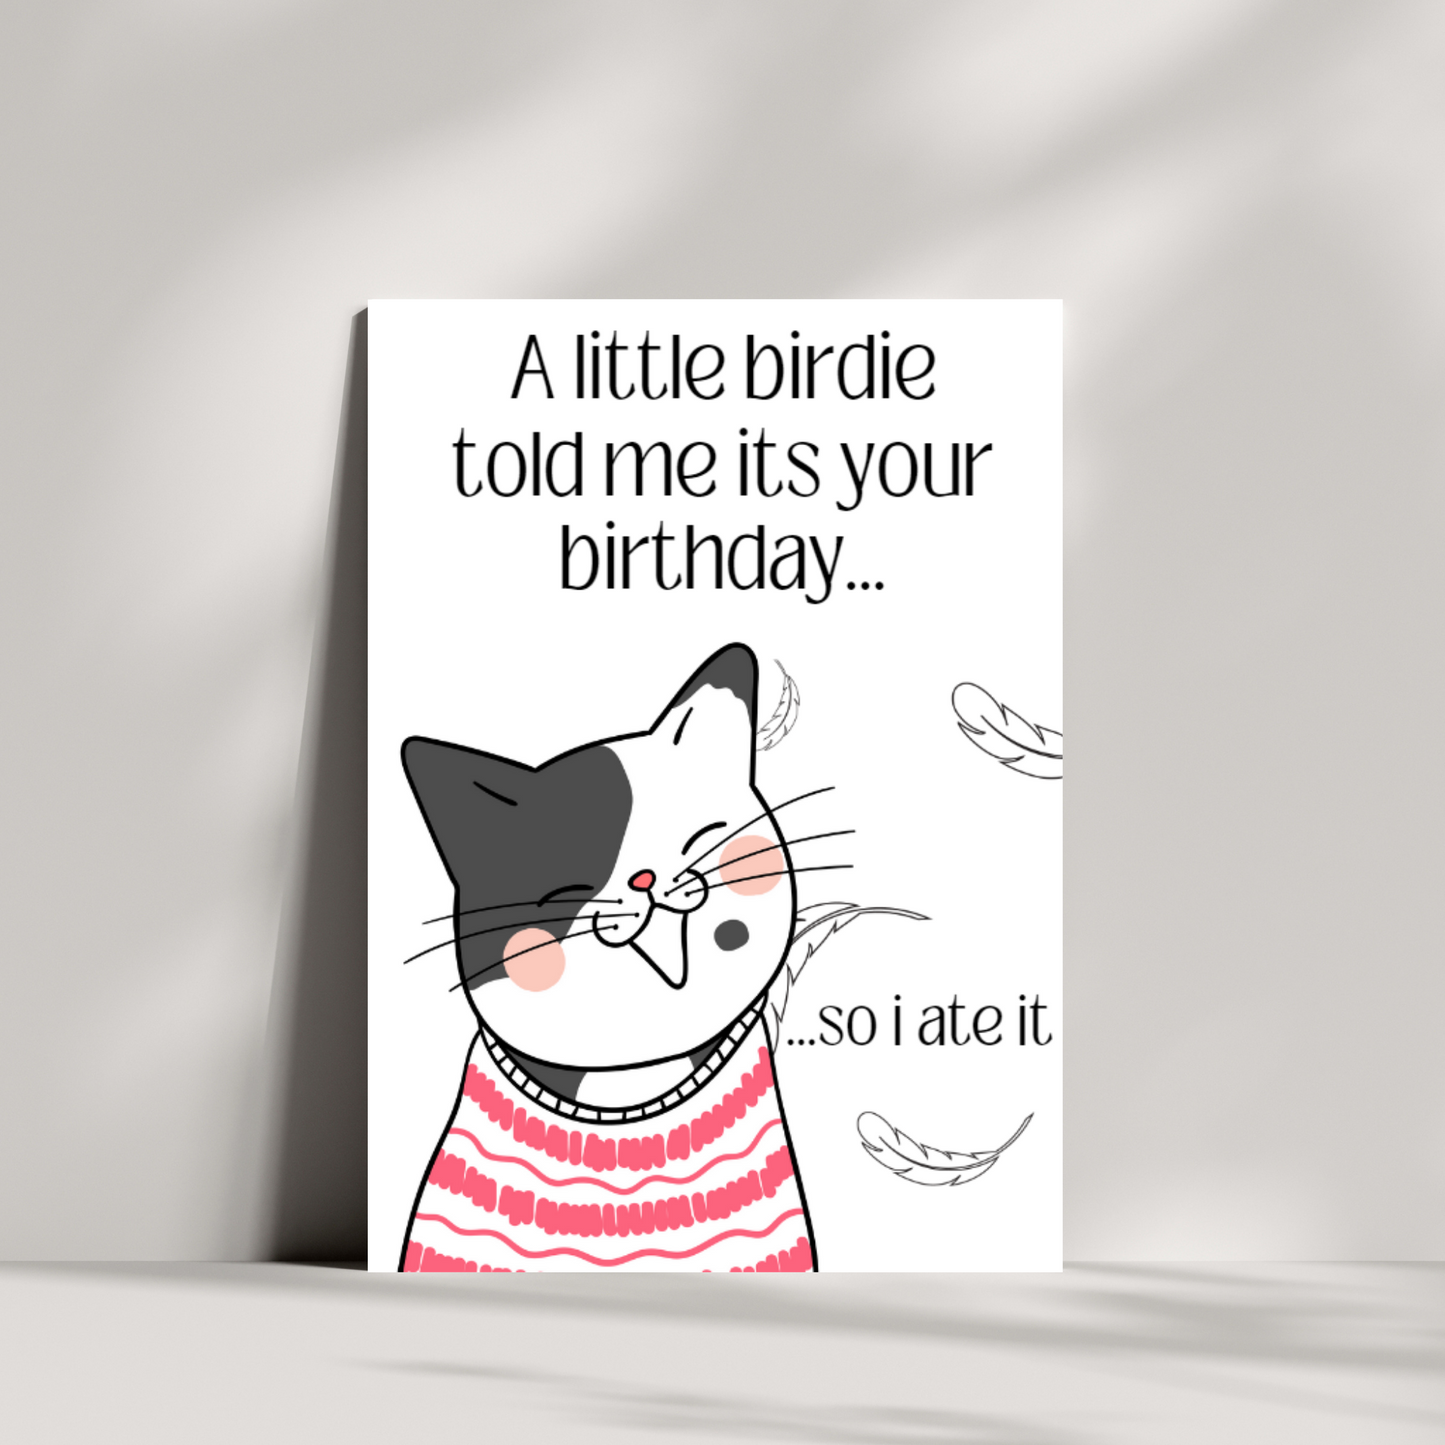 A little birdie told me its your birthday card - funny cat greeting card